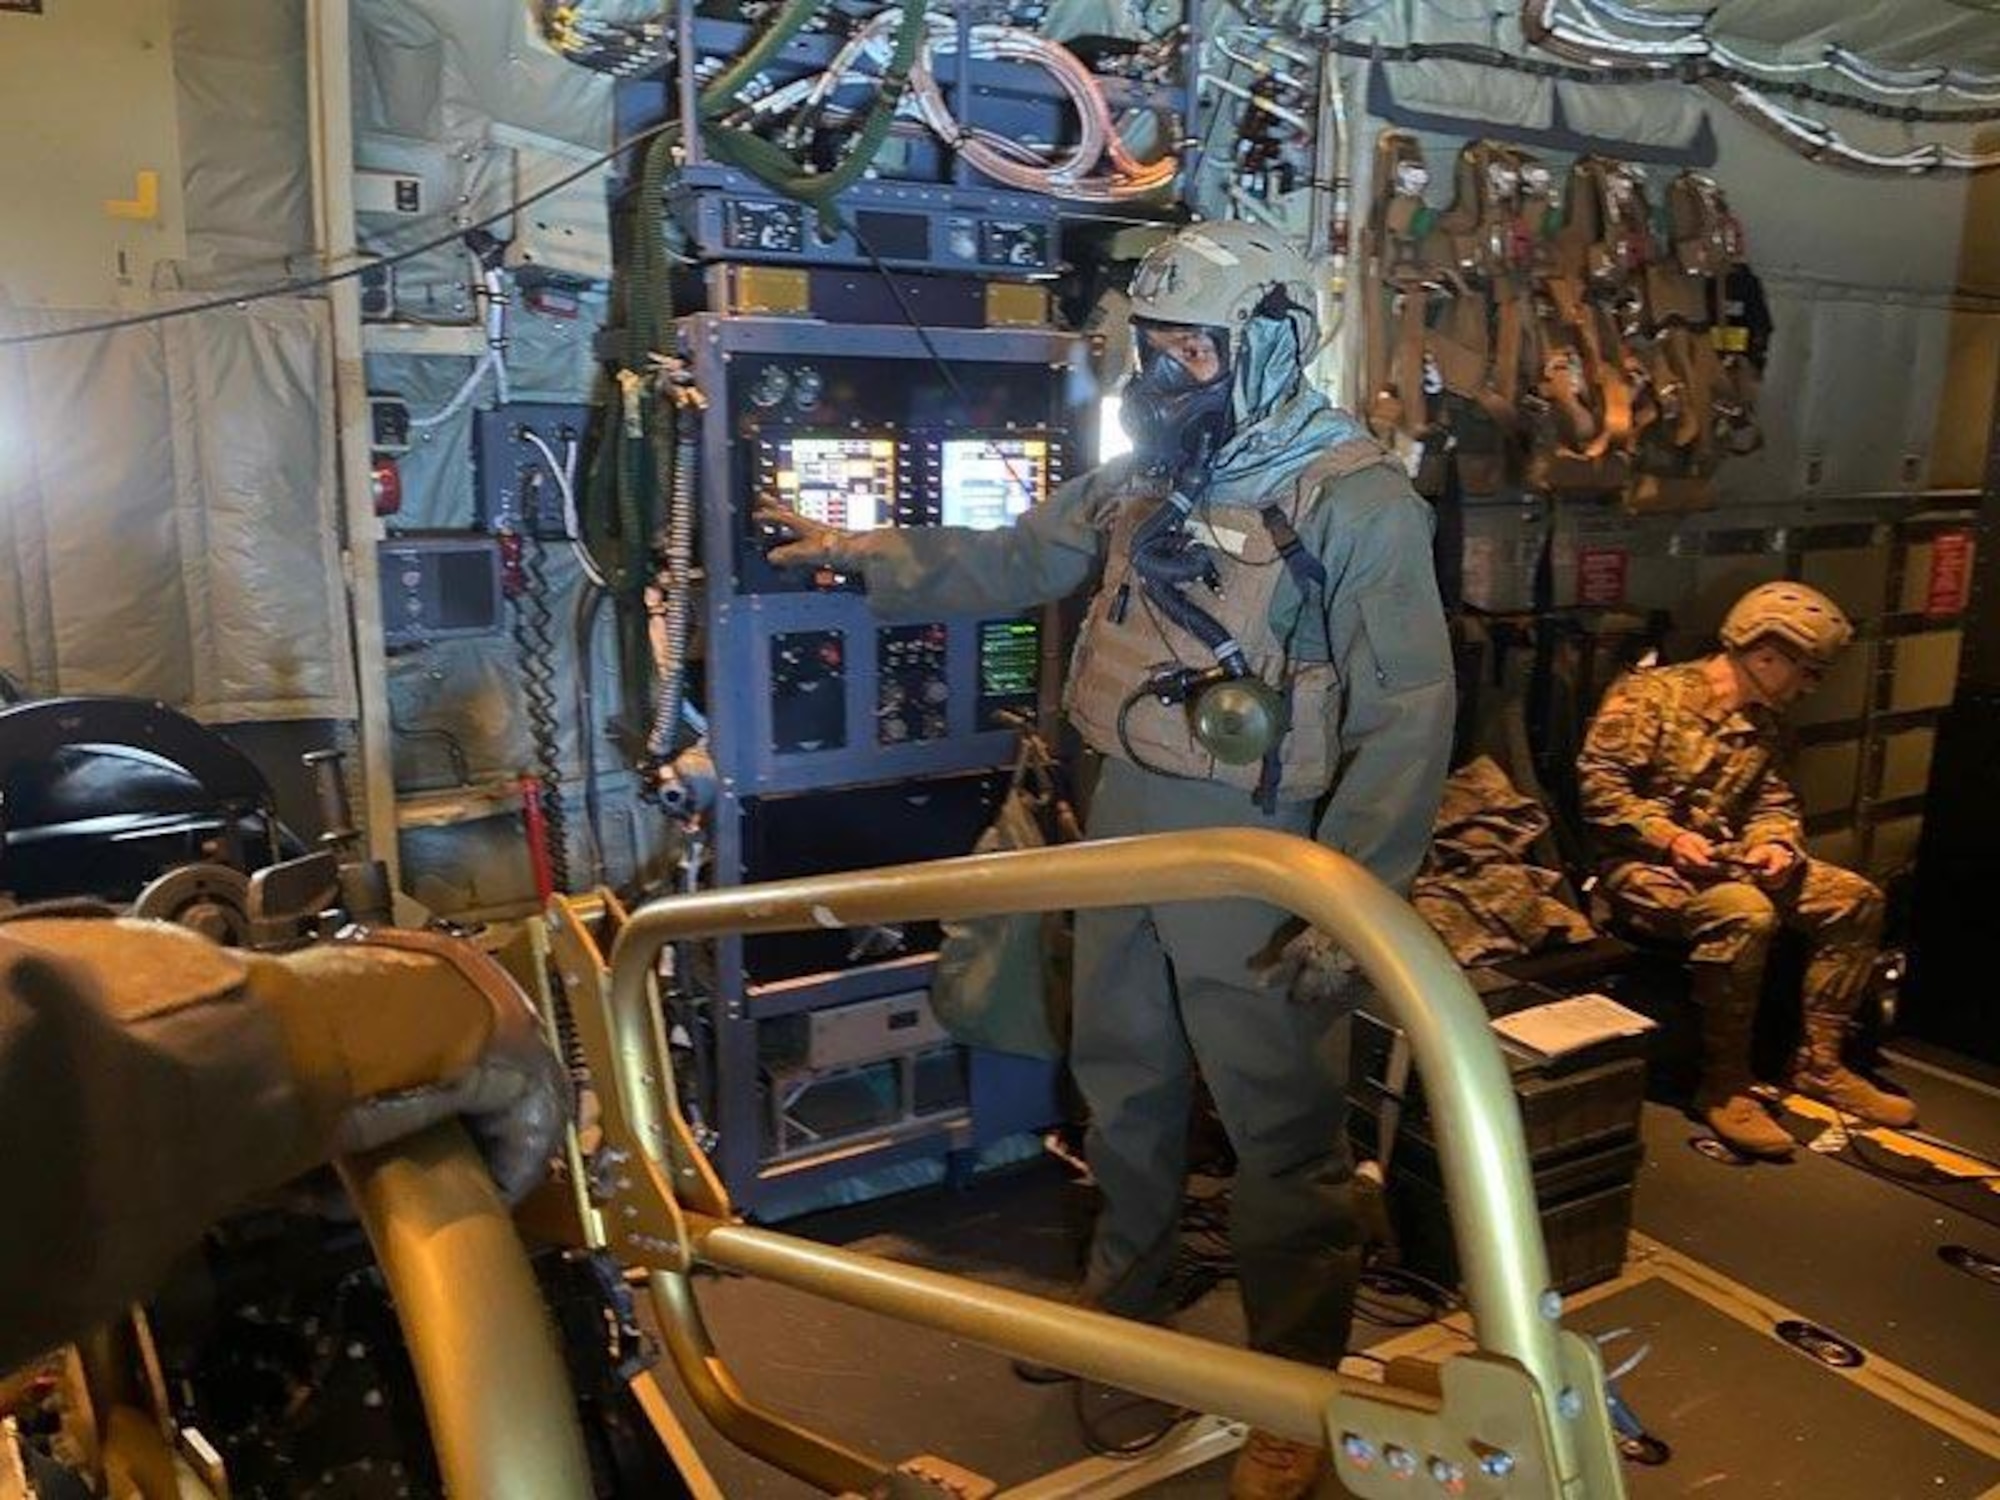 Airman in mask points while operating screen.